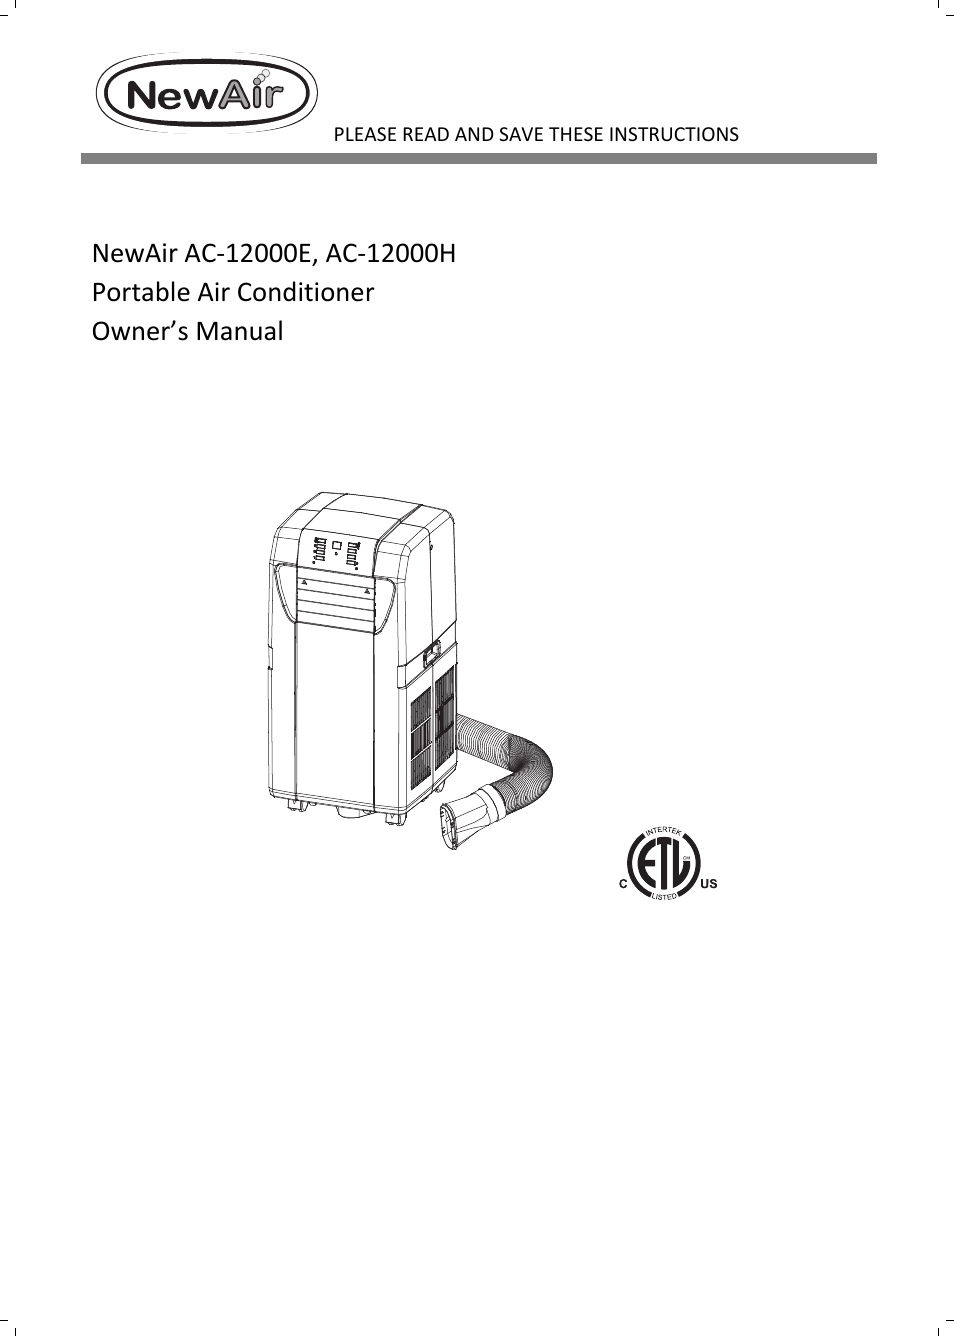 NewAir PORTABLE AIR CONDITIONER AC 12000E User Manual | 16 pages